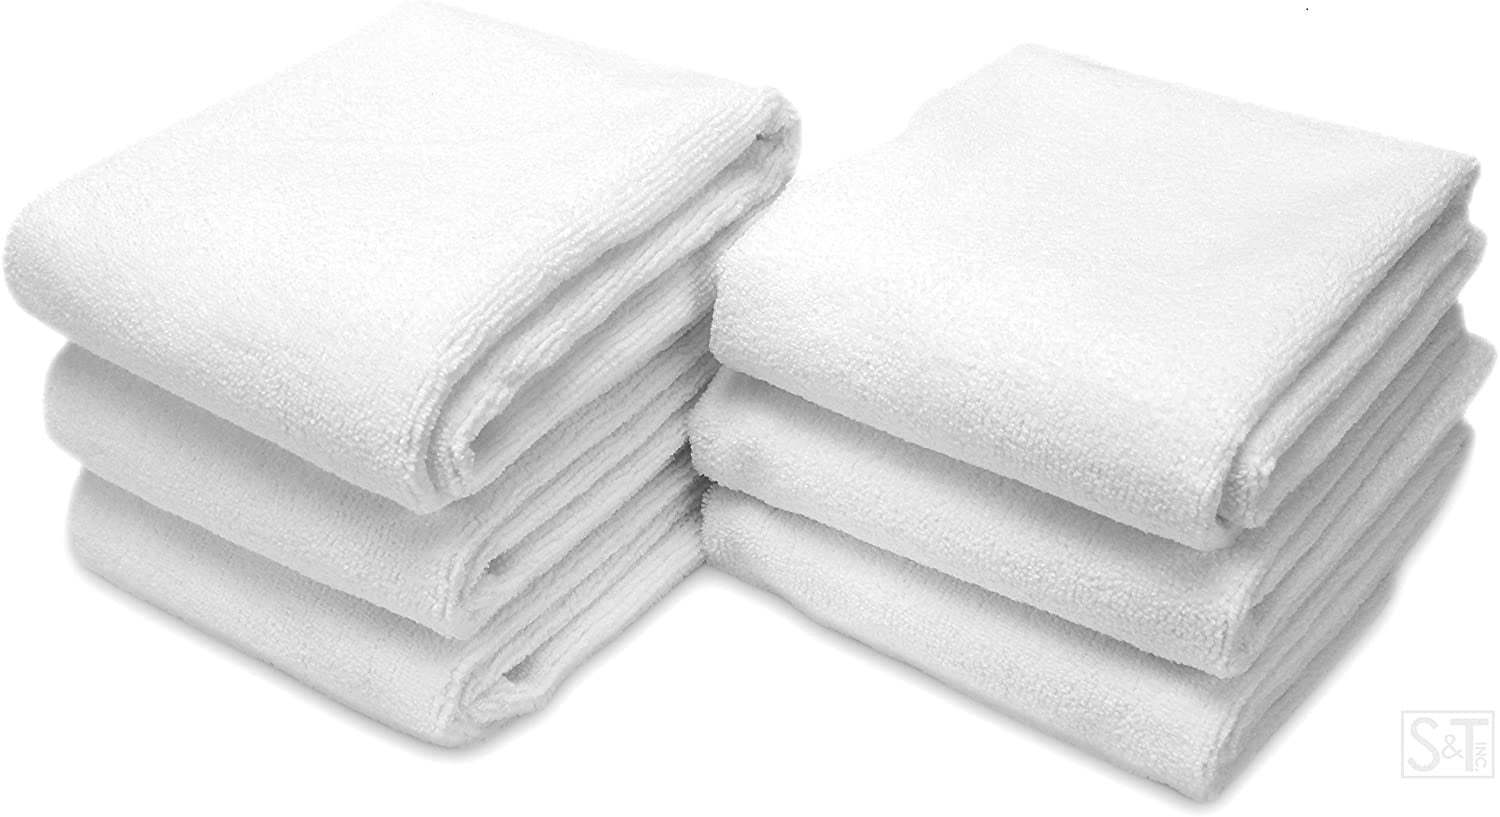 MIMAATEX Basic Towels-20x40 inches-6 Pack-White-100% Cotton- Hair